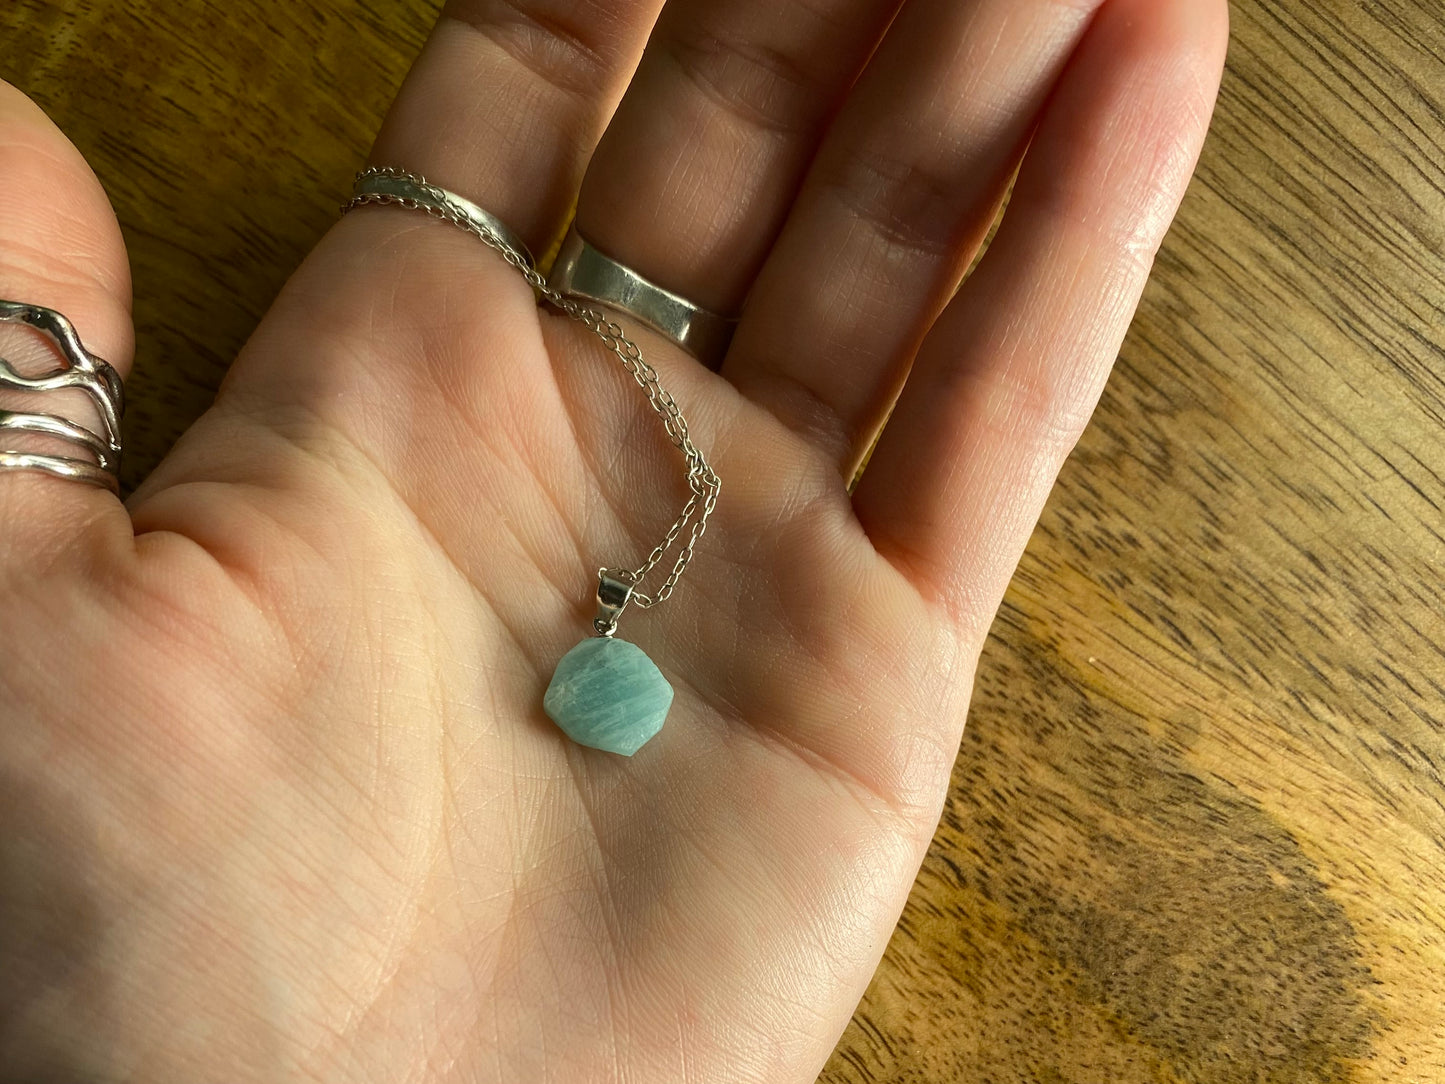 9ct Gold Amazonite Pendant, 925 Sterling Silver Pendant, 10mm Natural Blue Amazonite Necklace Pendant, Cute Minimalist 9k Raw Crystal Jewellery